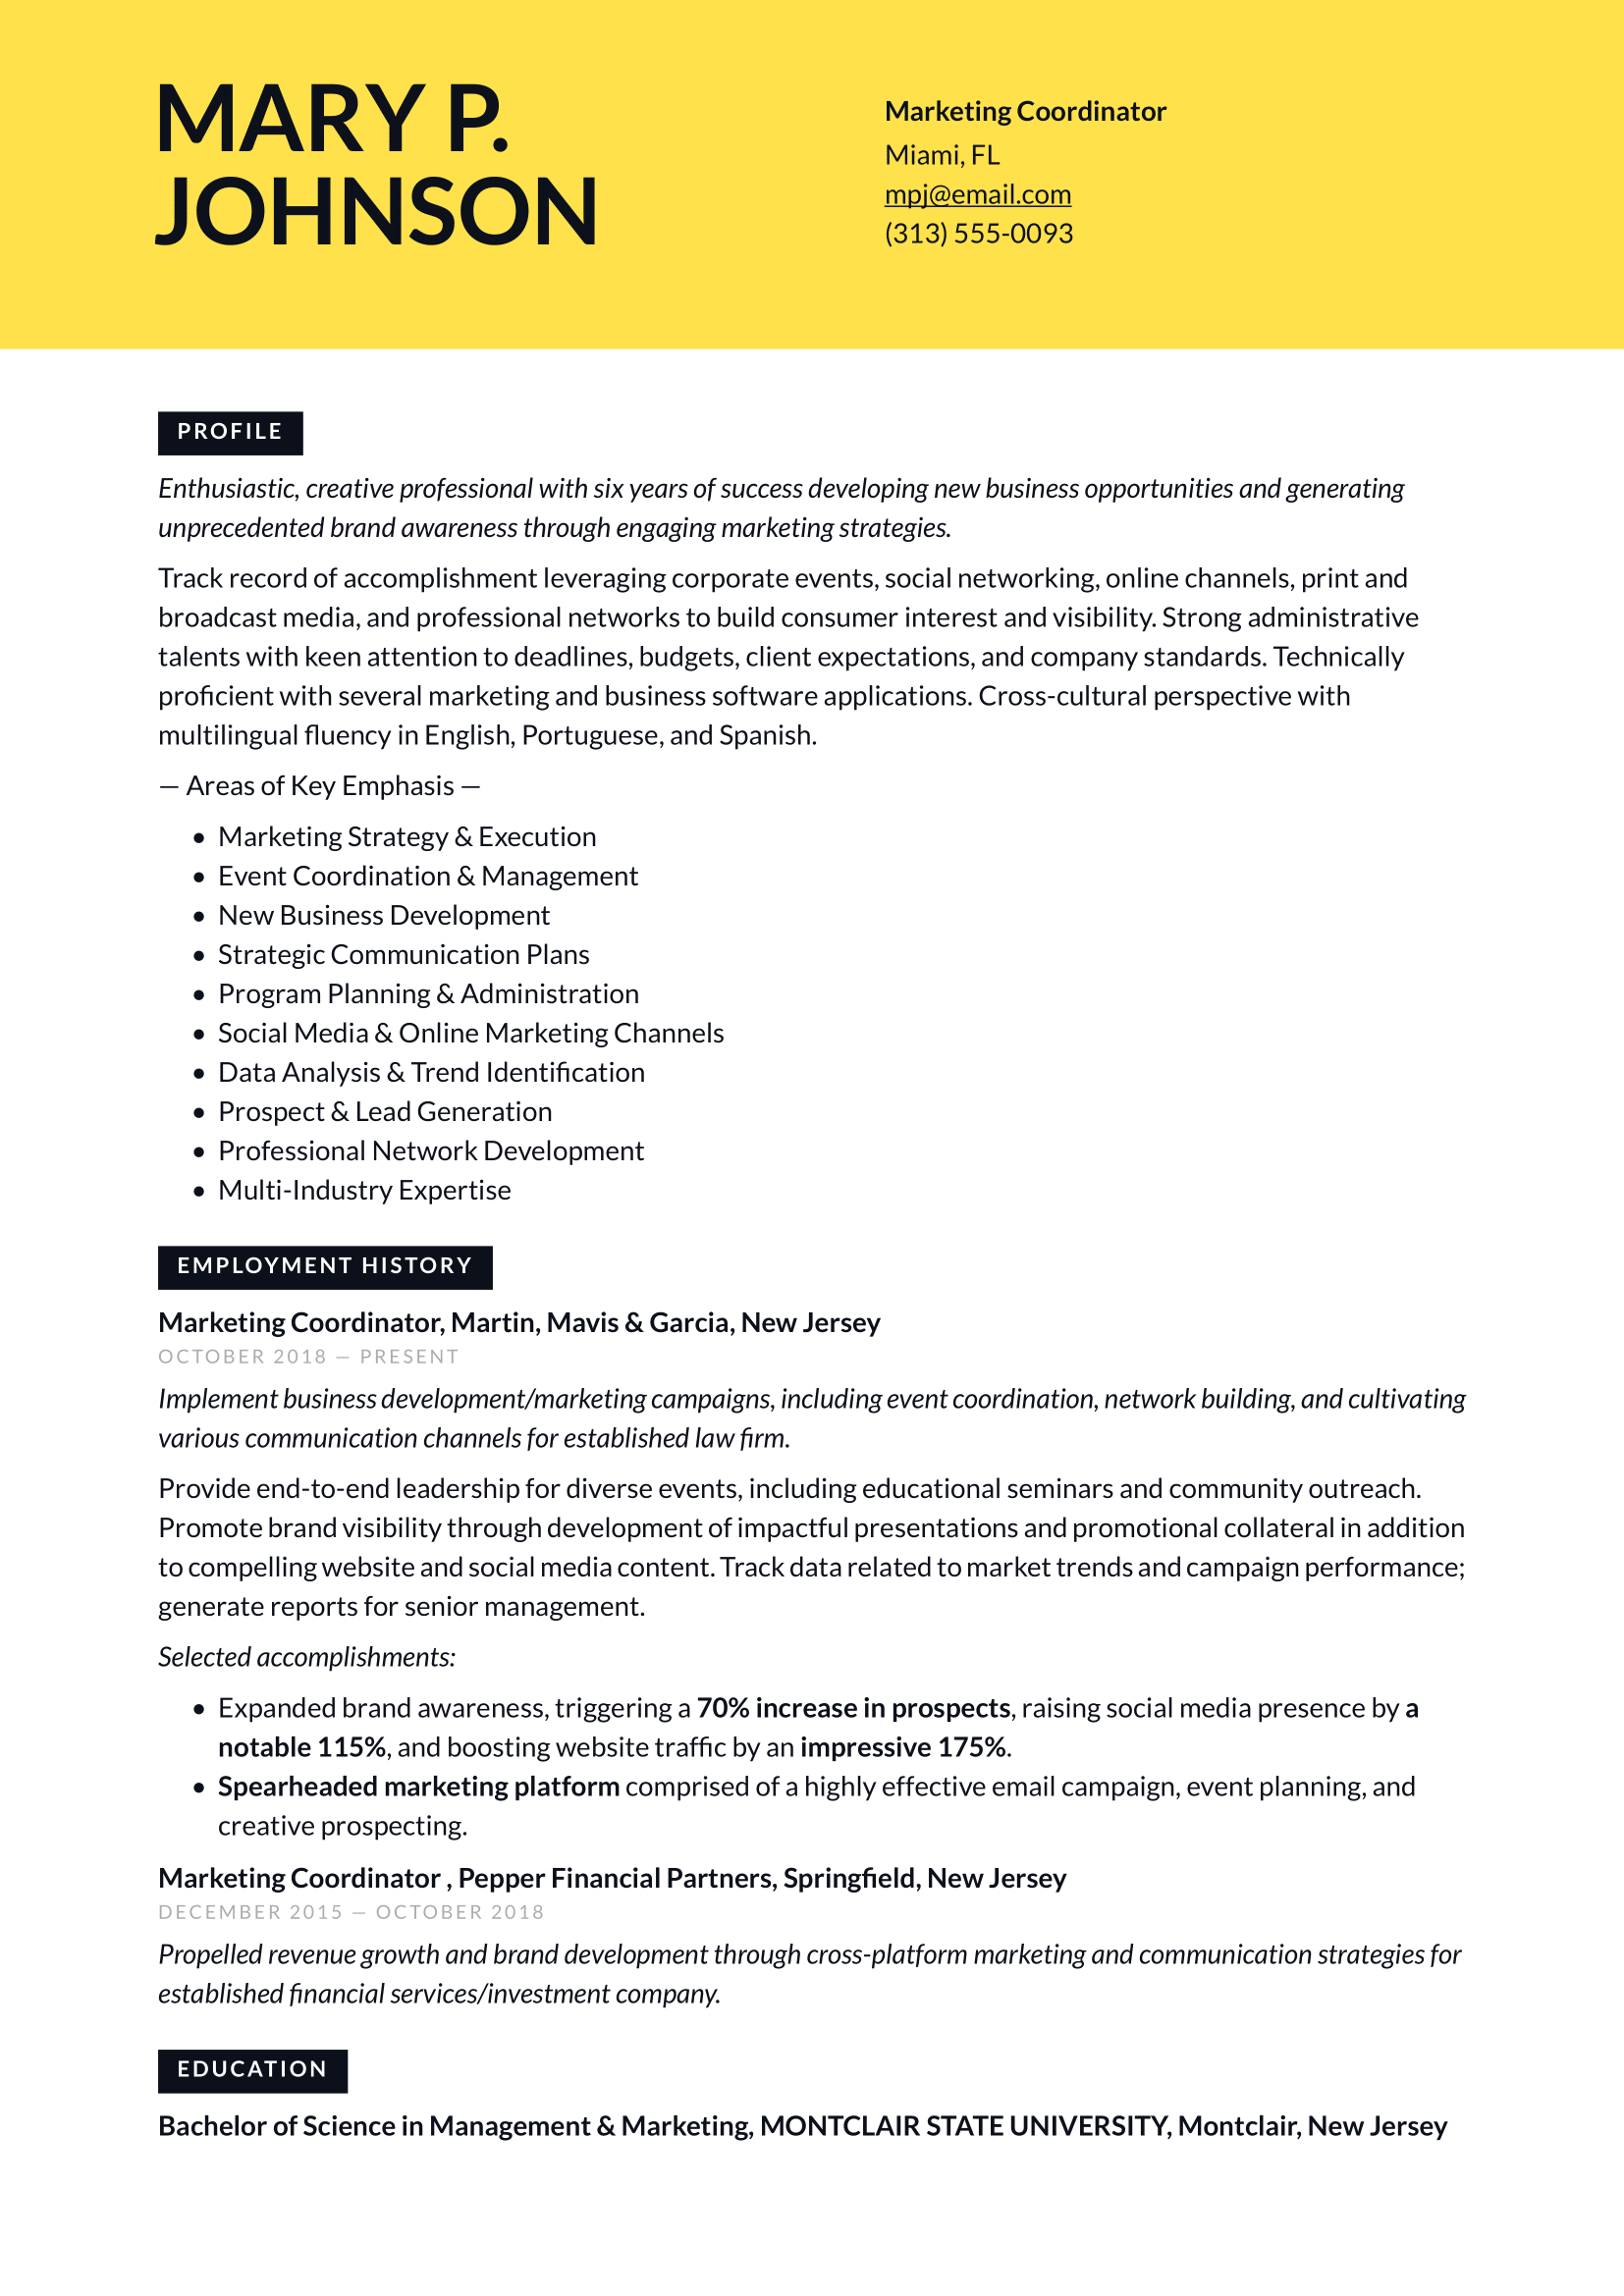 Marketing Coordinator Resume Example and Writing Guide